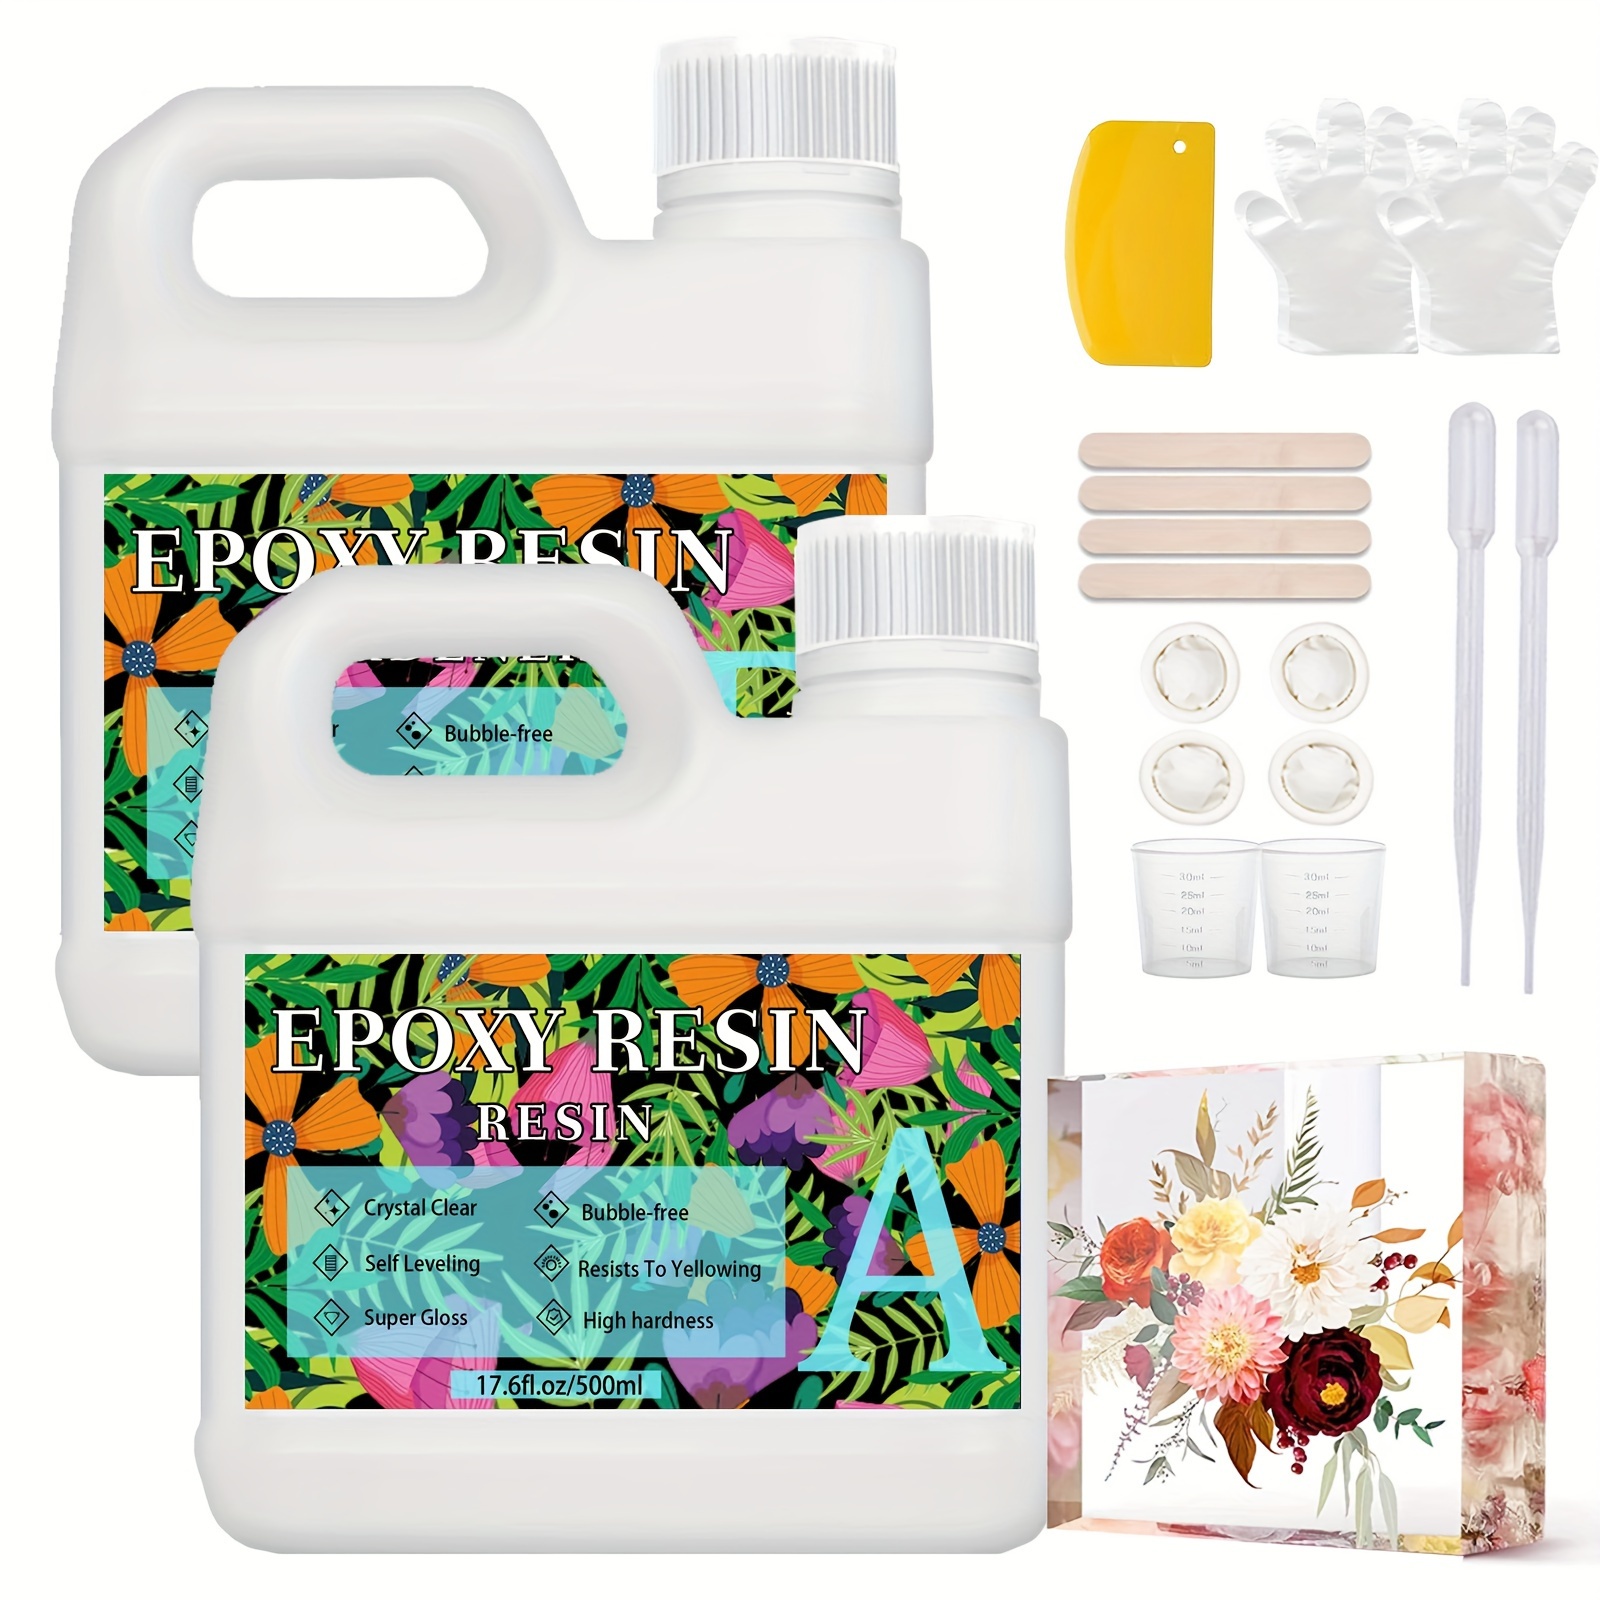 

Epoxy Resin Kit, Resin Epoxy Resin Set (1:1) Without Bubbles, Low Odor, Transparent Cast Resin, Suitable For Diy Jewelry Making, Wood Filling, Handicrafts